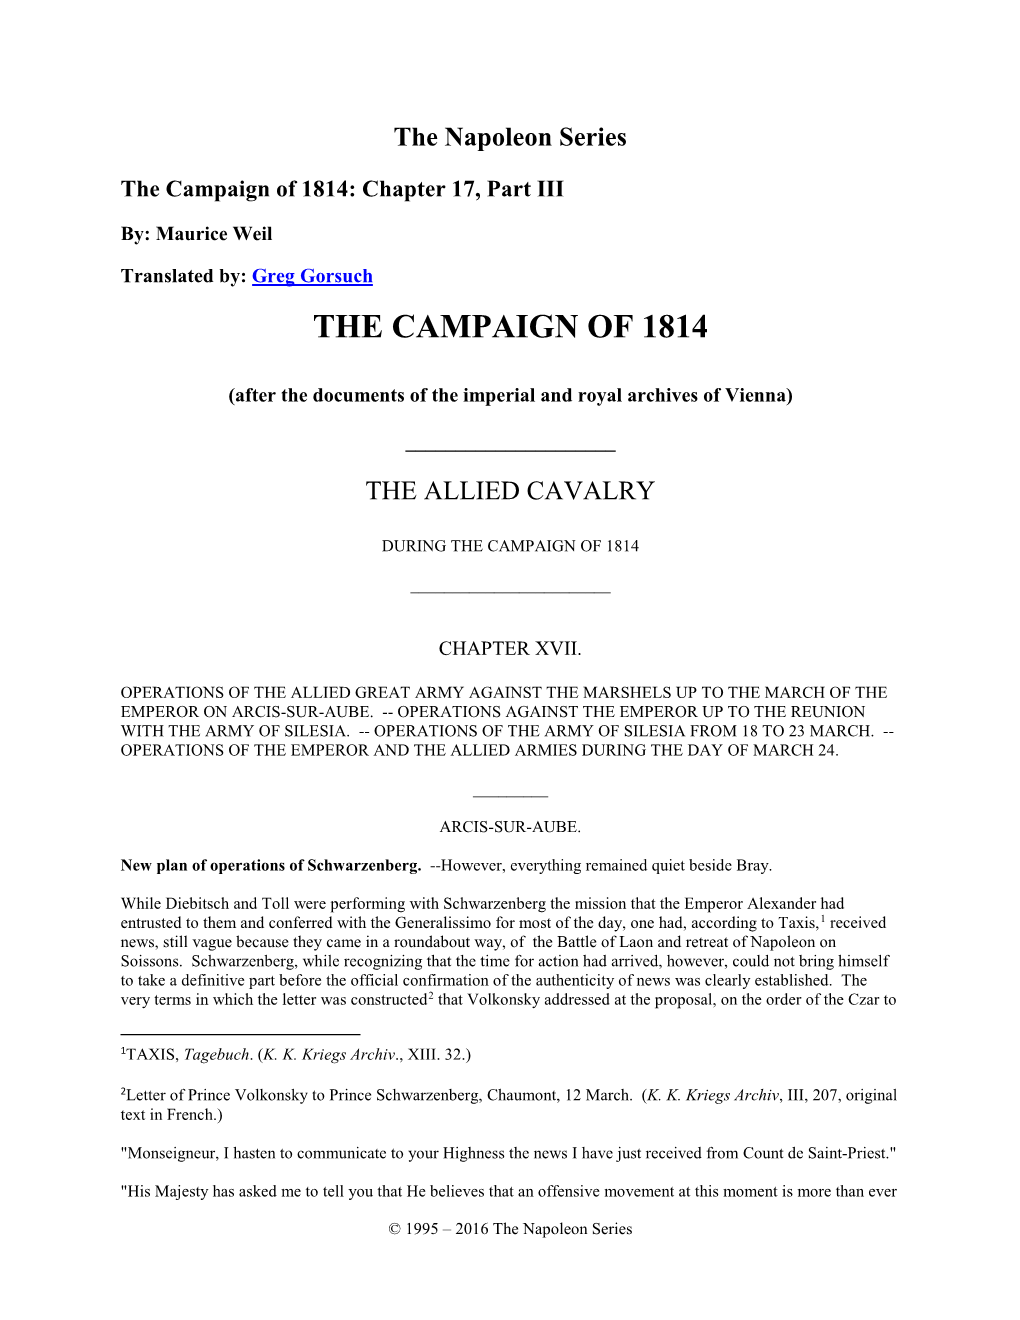 The Campaign of 1814: Chapter 17, Part III